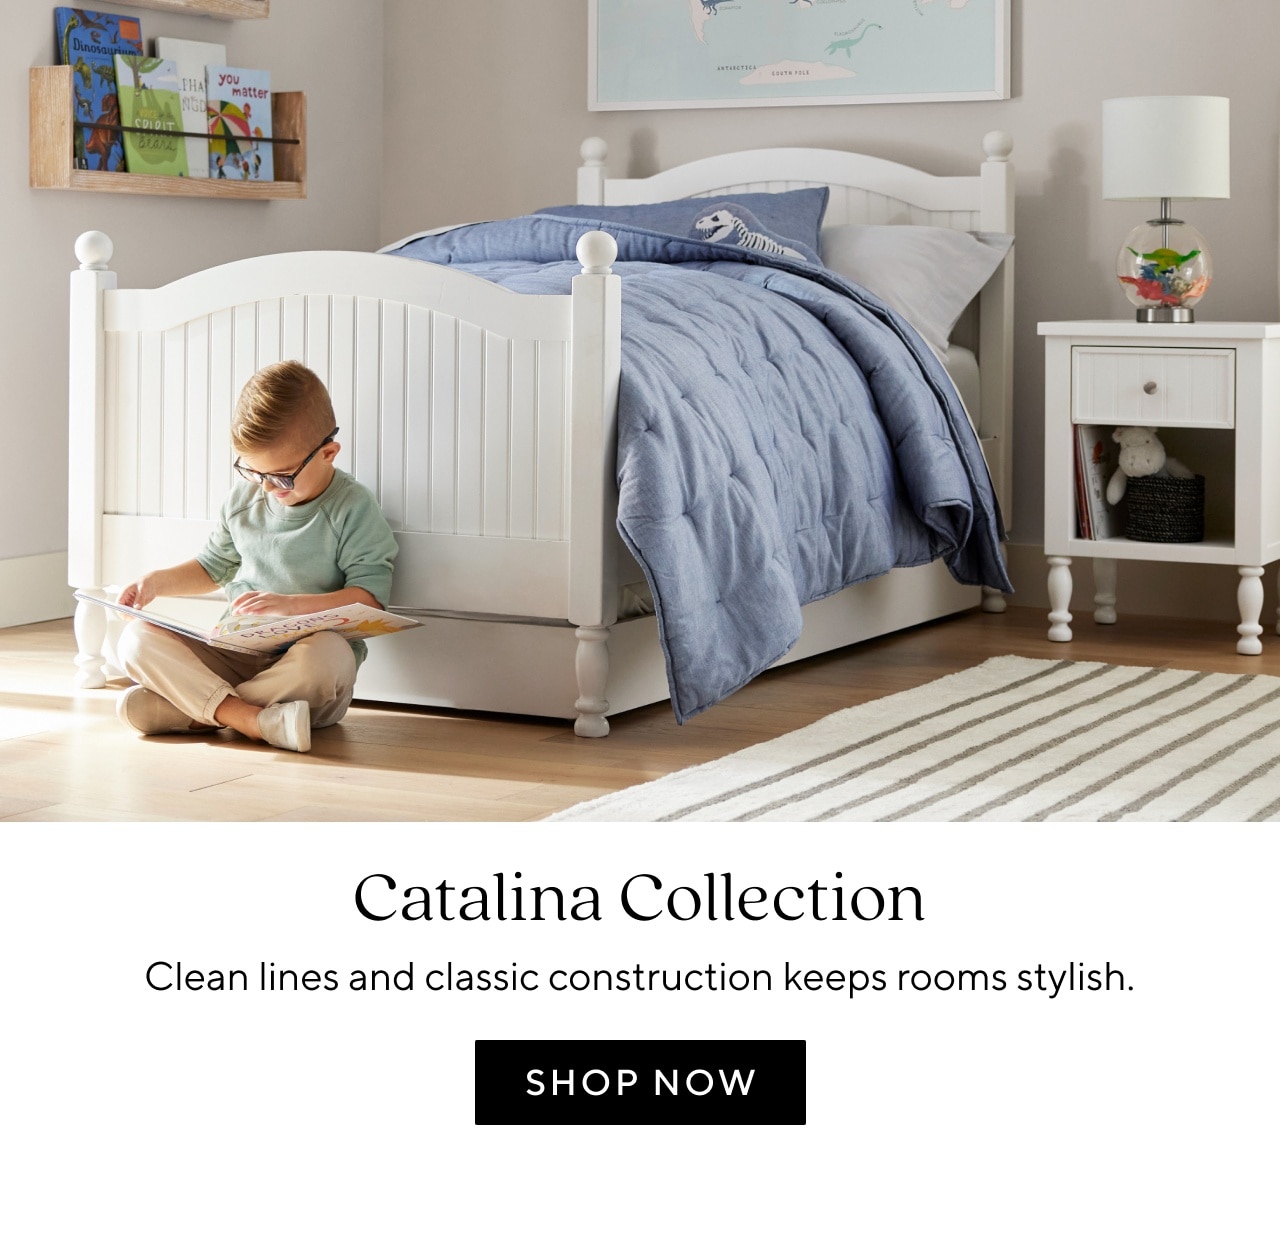 CATALINA COLLECTION - SHOP NOW